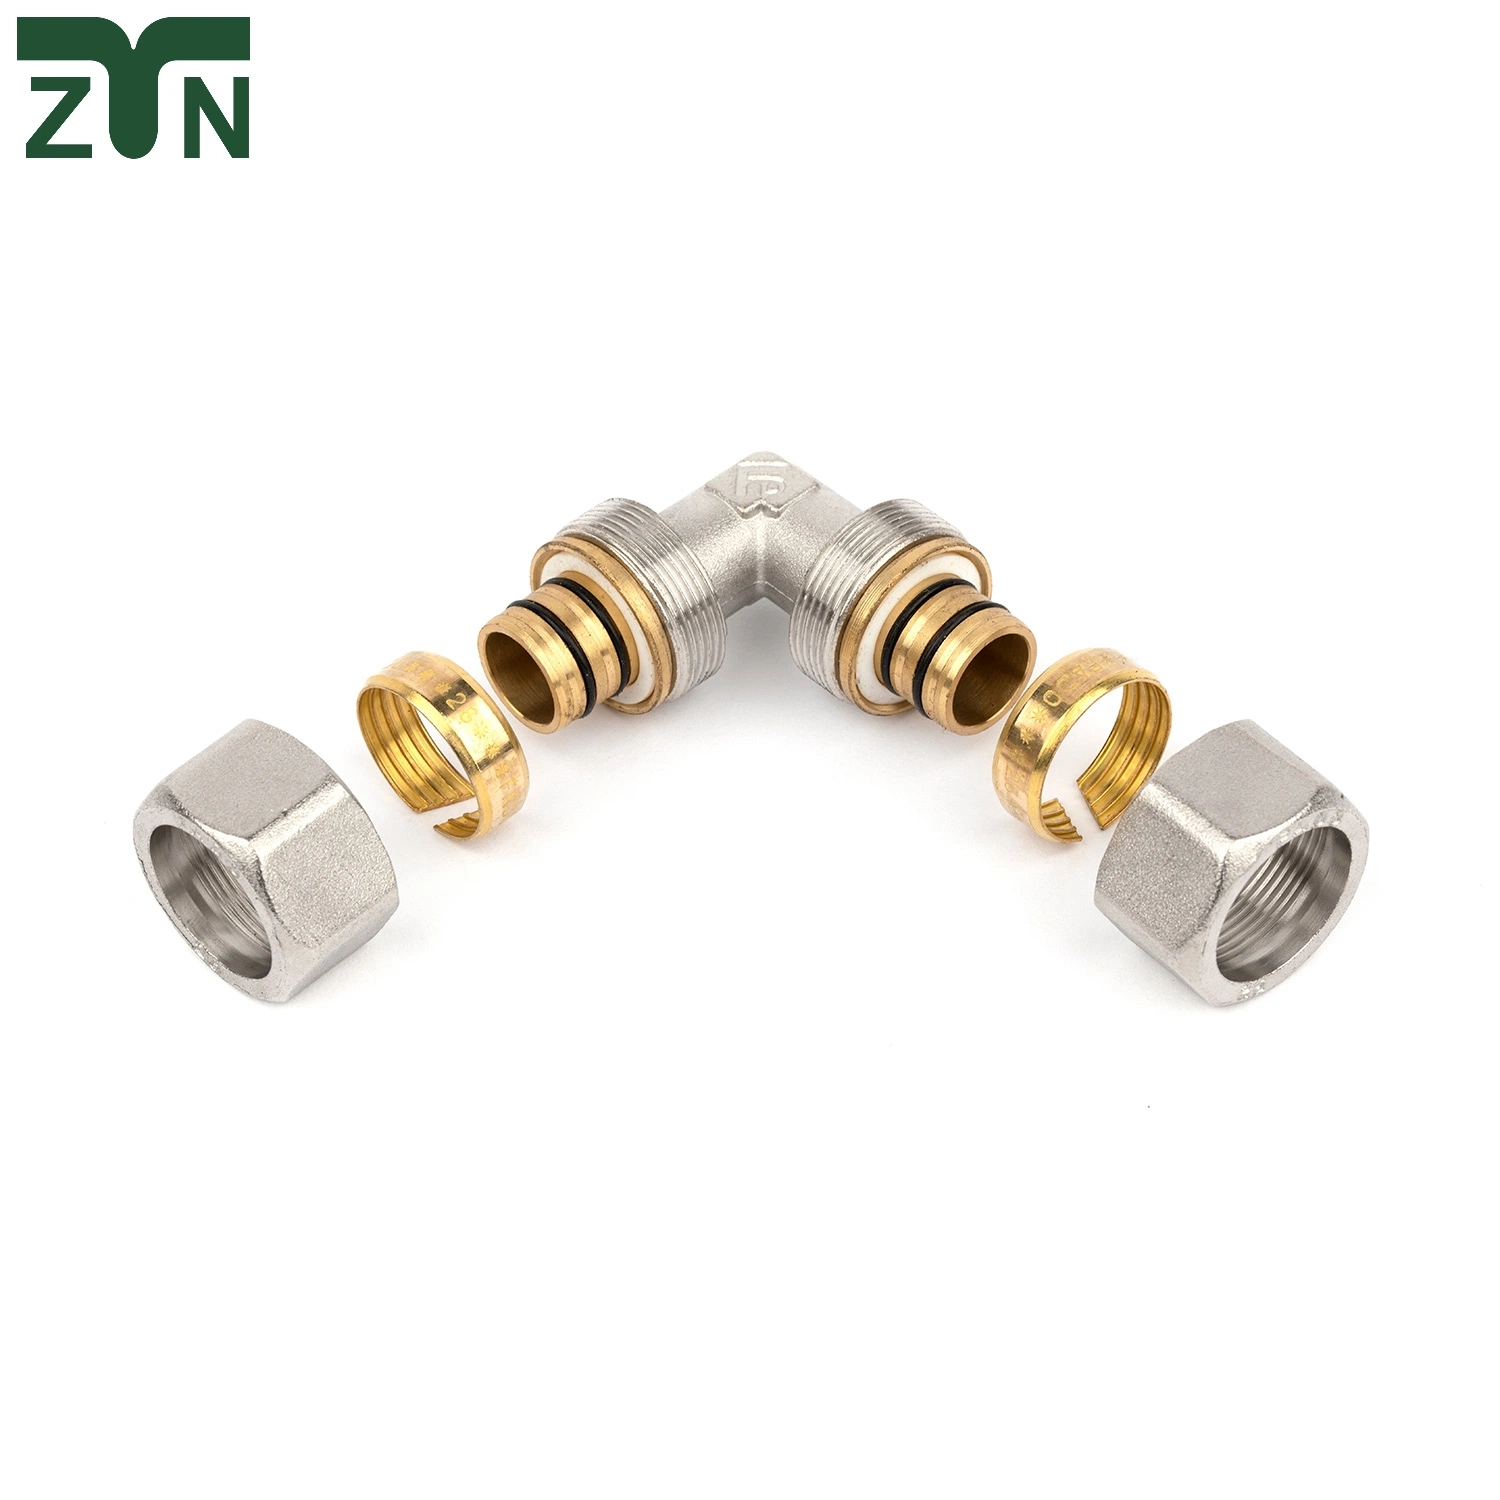 Male Coupler Plumbing Elbow Brass Compression Pipe Tube Fittings for Pex-Al-Pex Multilayer/Composite Pipes